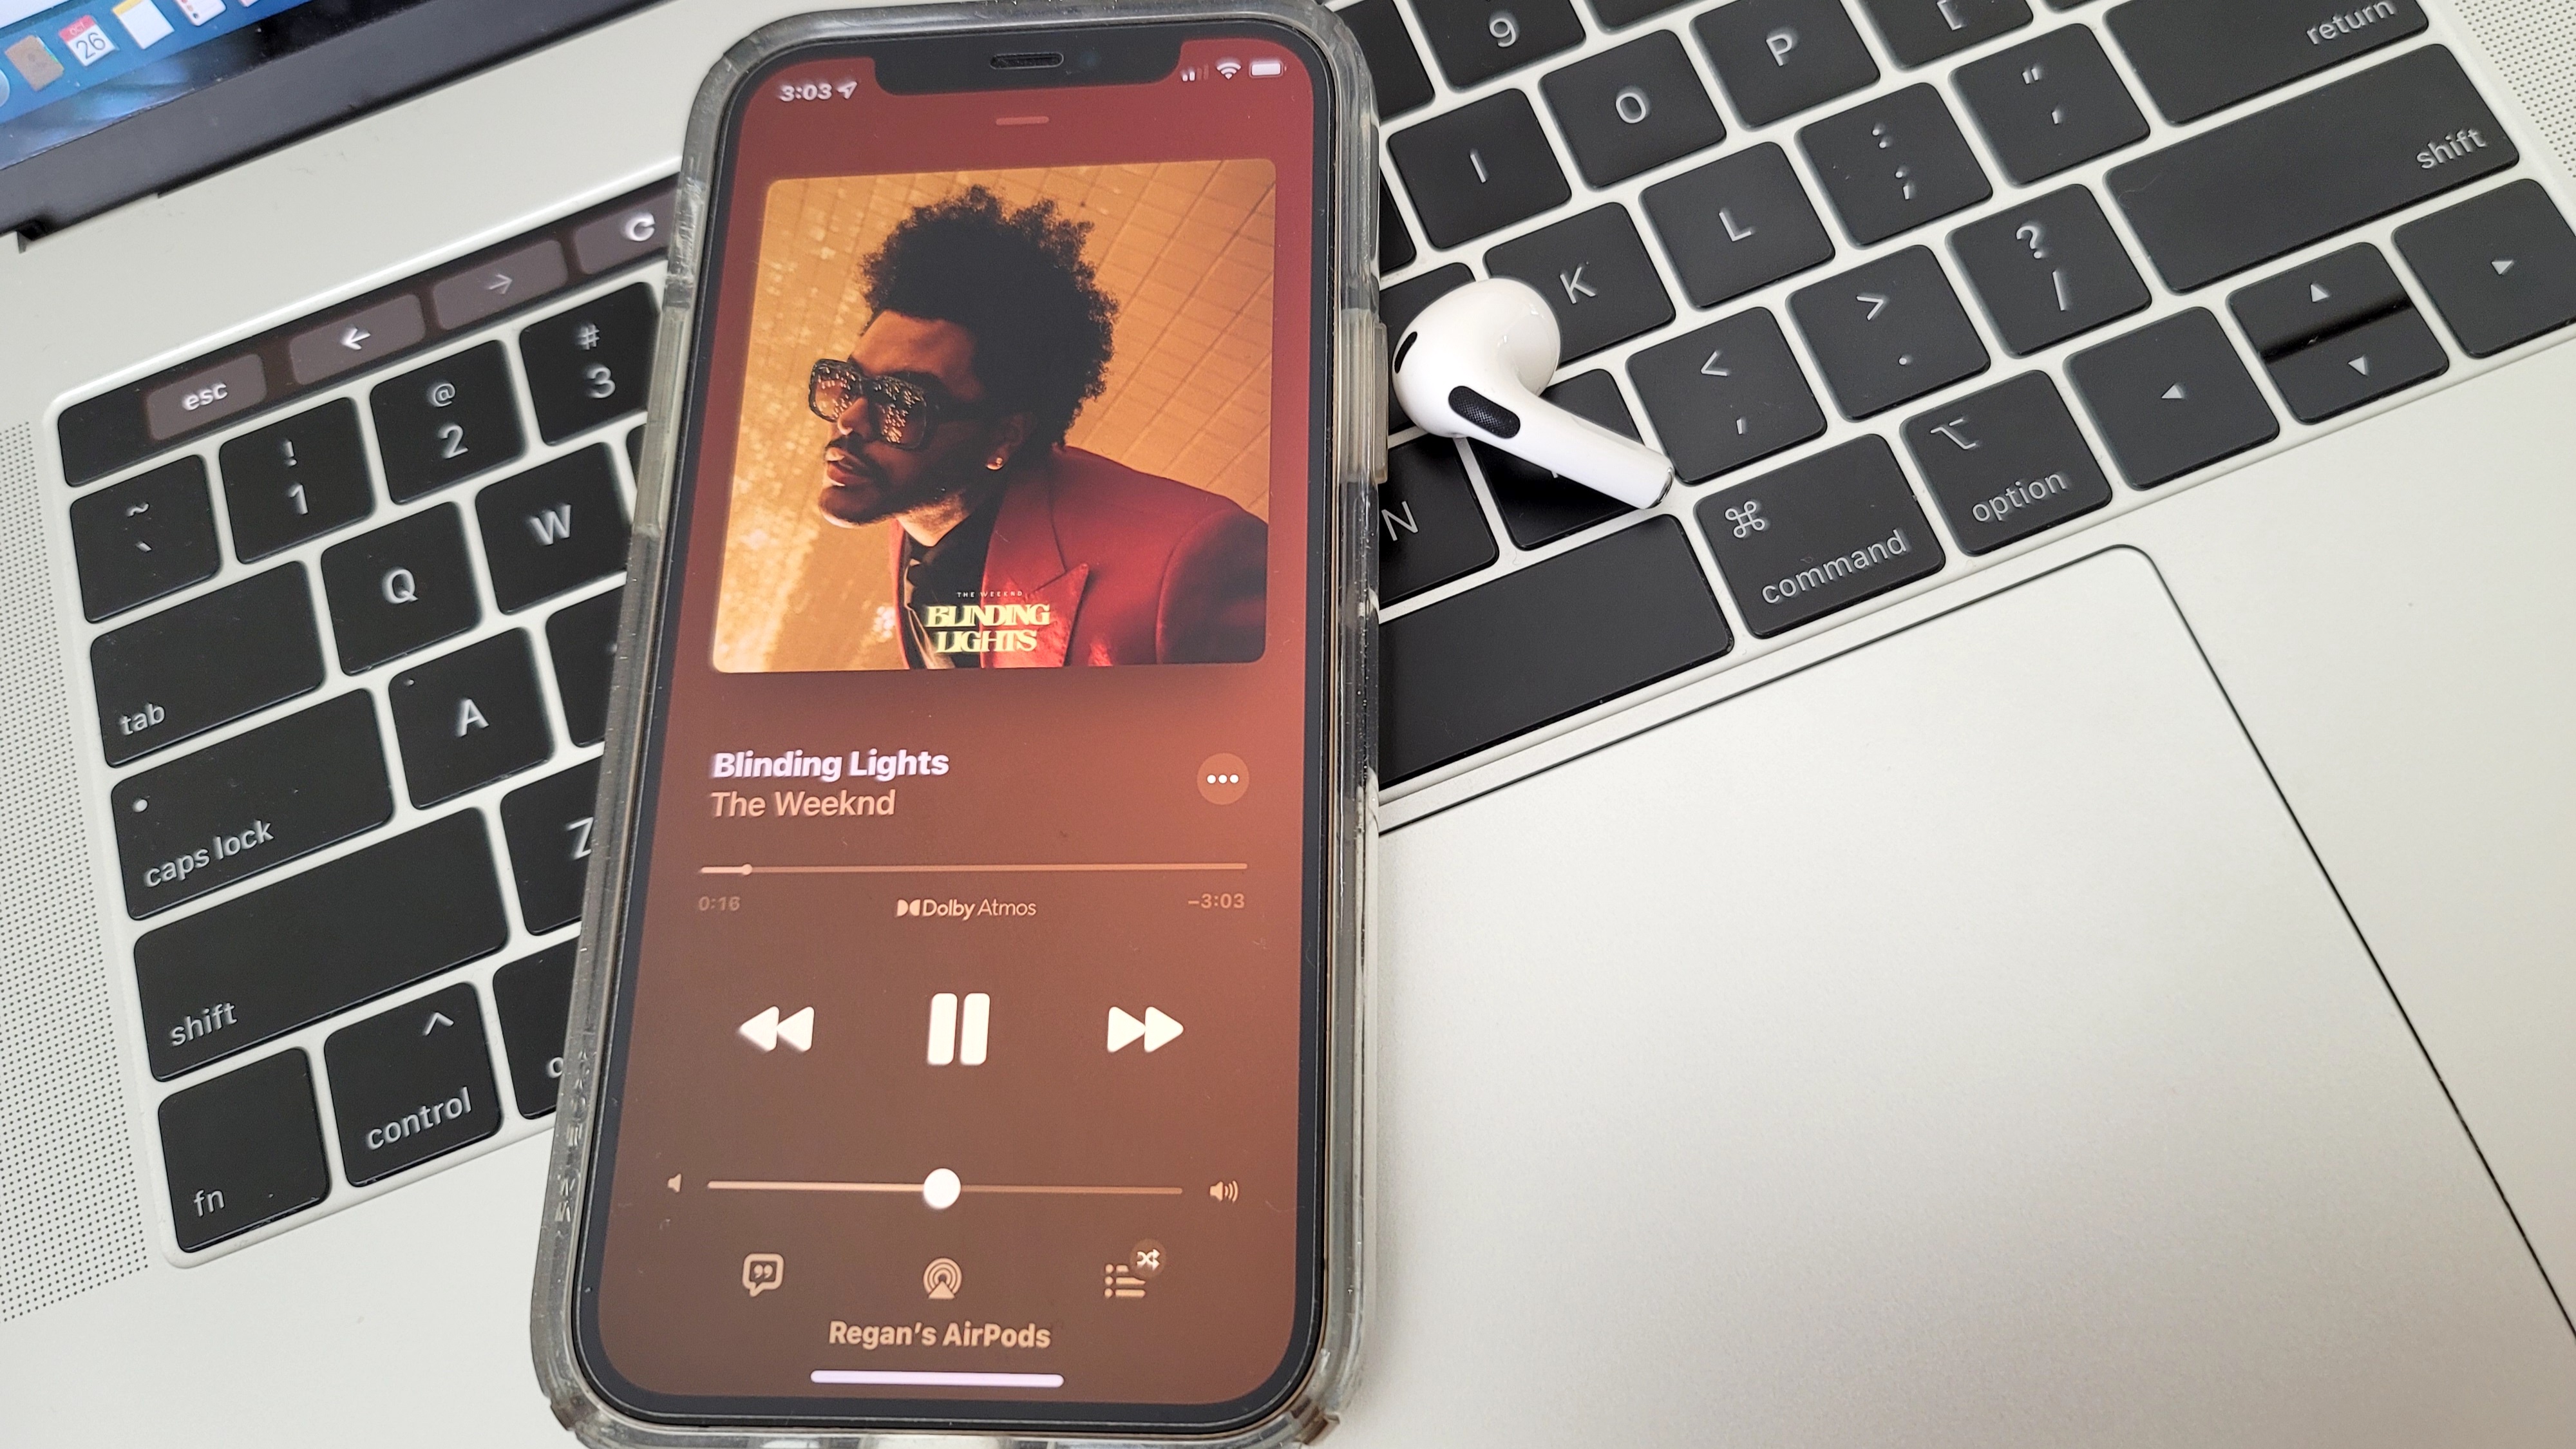 Apple AirPods 3 Play Weeknd's "dazzling lights" on Apple Music